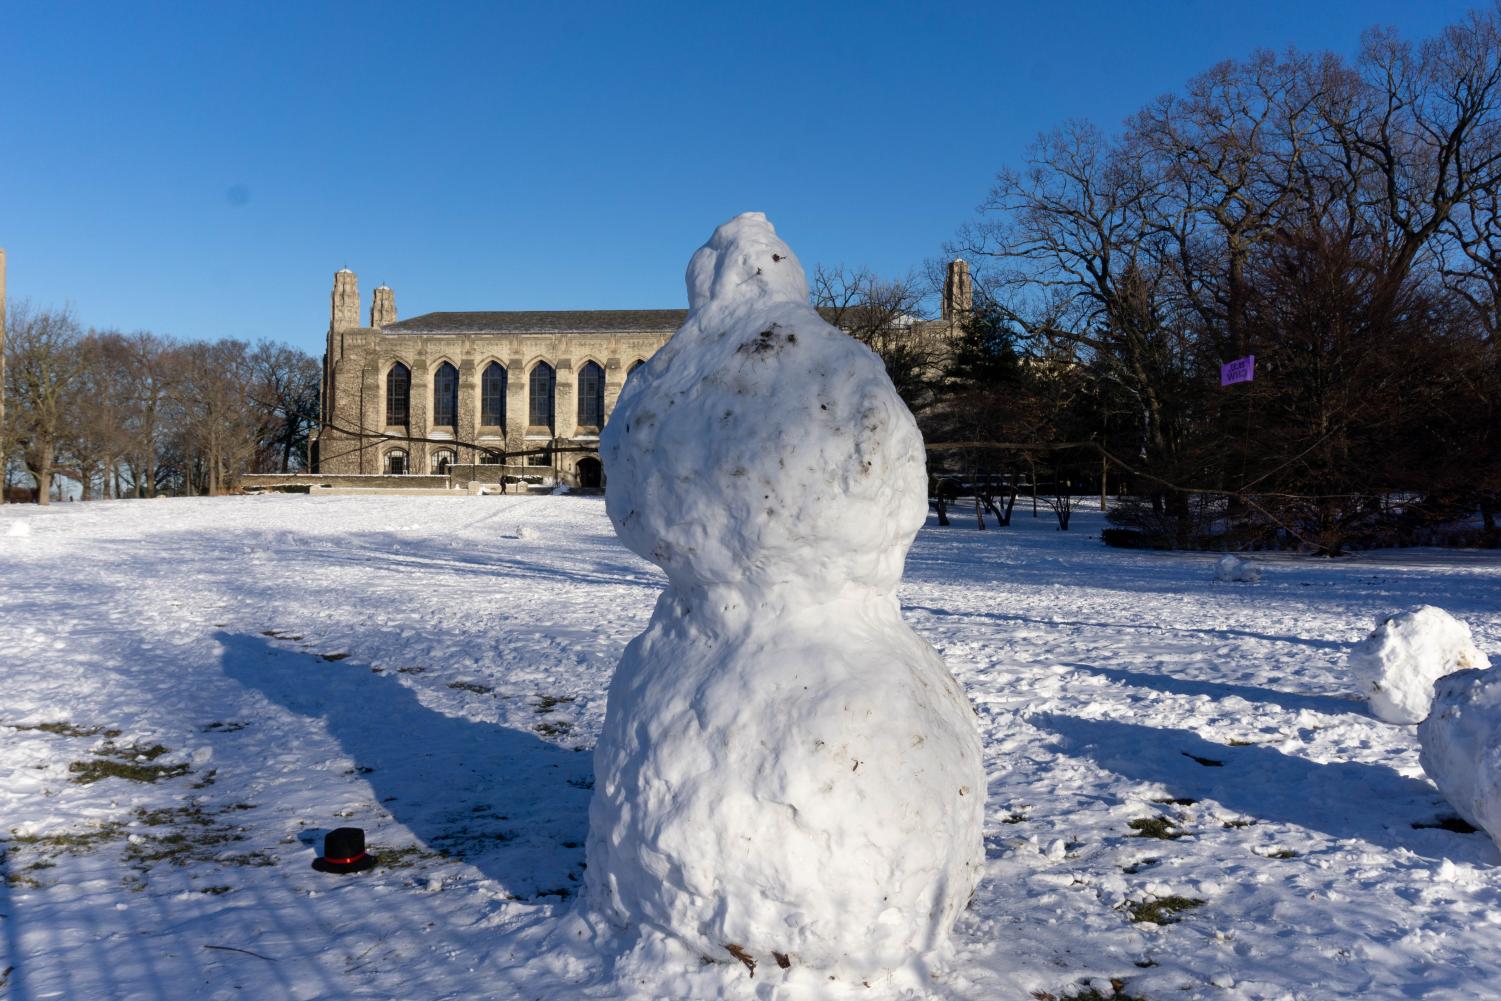 A huge snowman with stick arms outstretched.